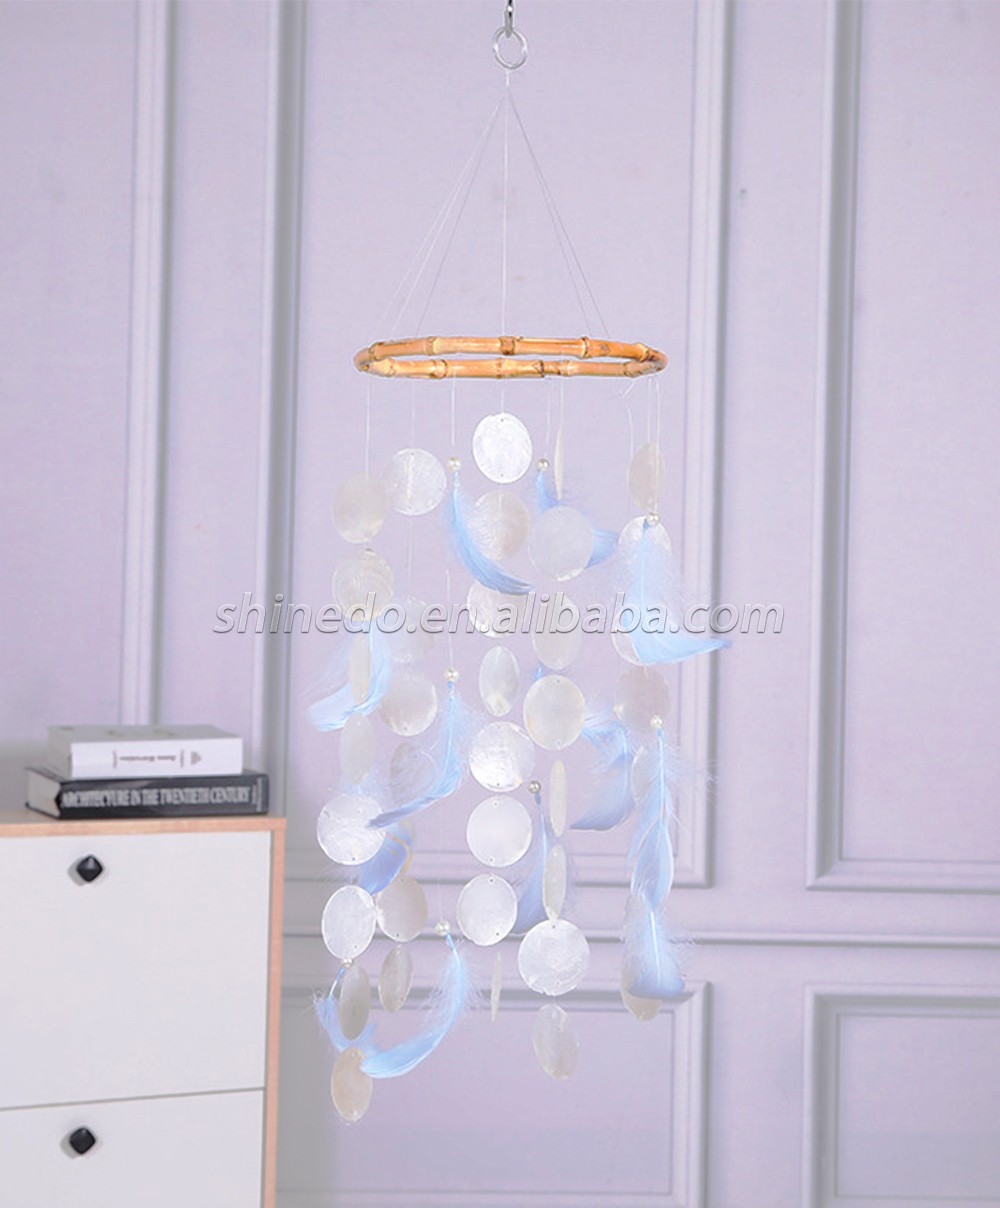 Natural Shell Dream Catcher Home Ornaments Innovative Gifts Wind Chimes Dreamcatcher Feathers Outdoor Wall Hangings Decoration